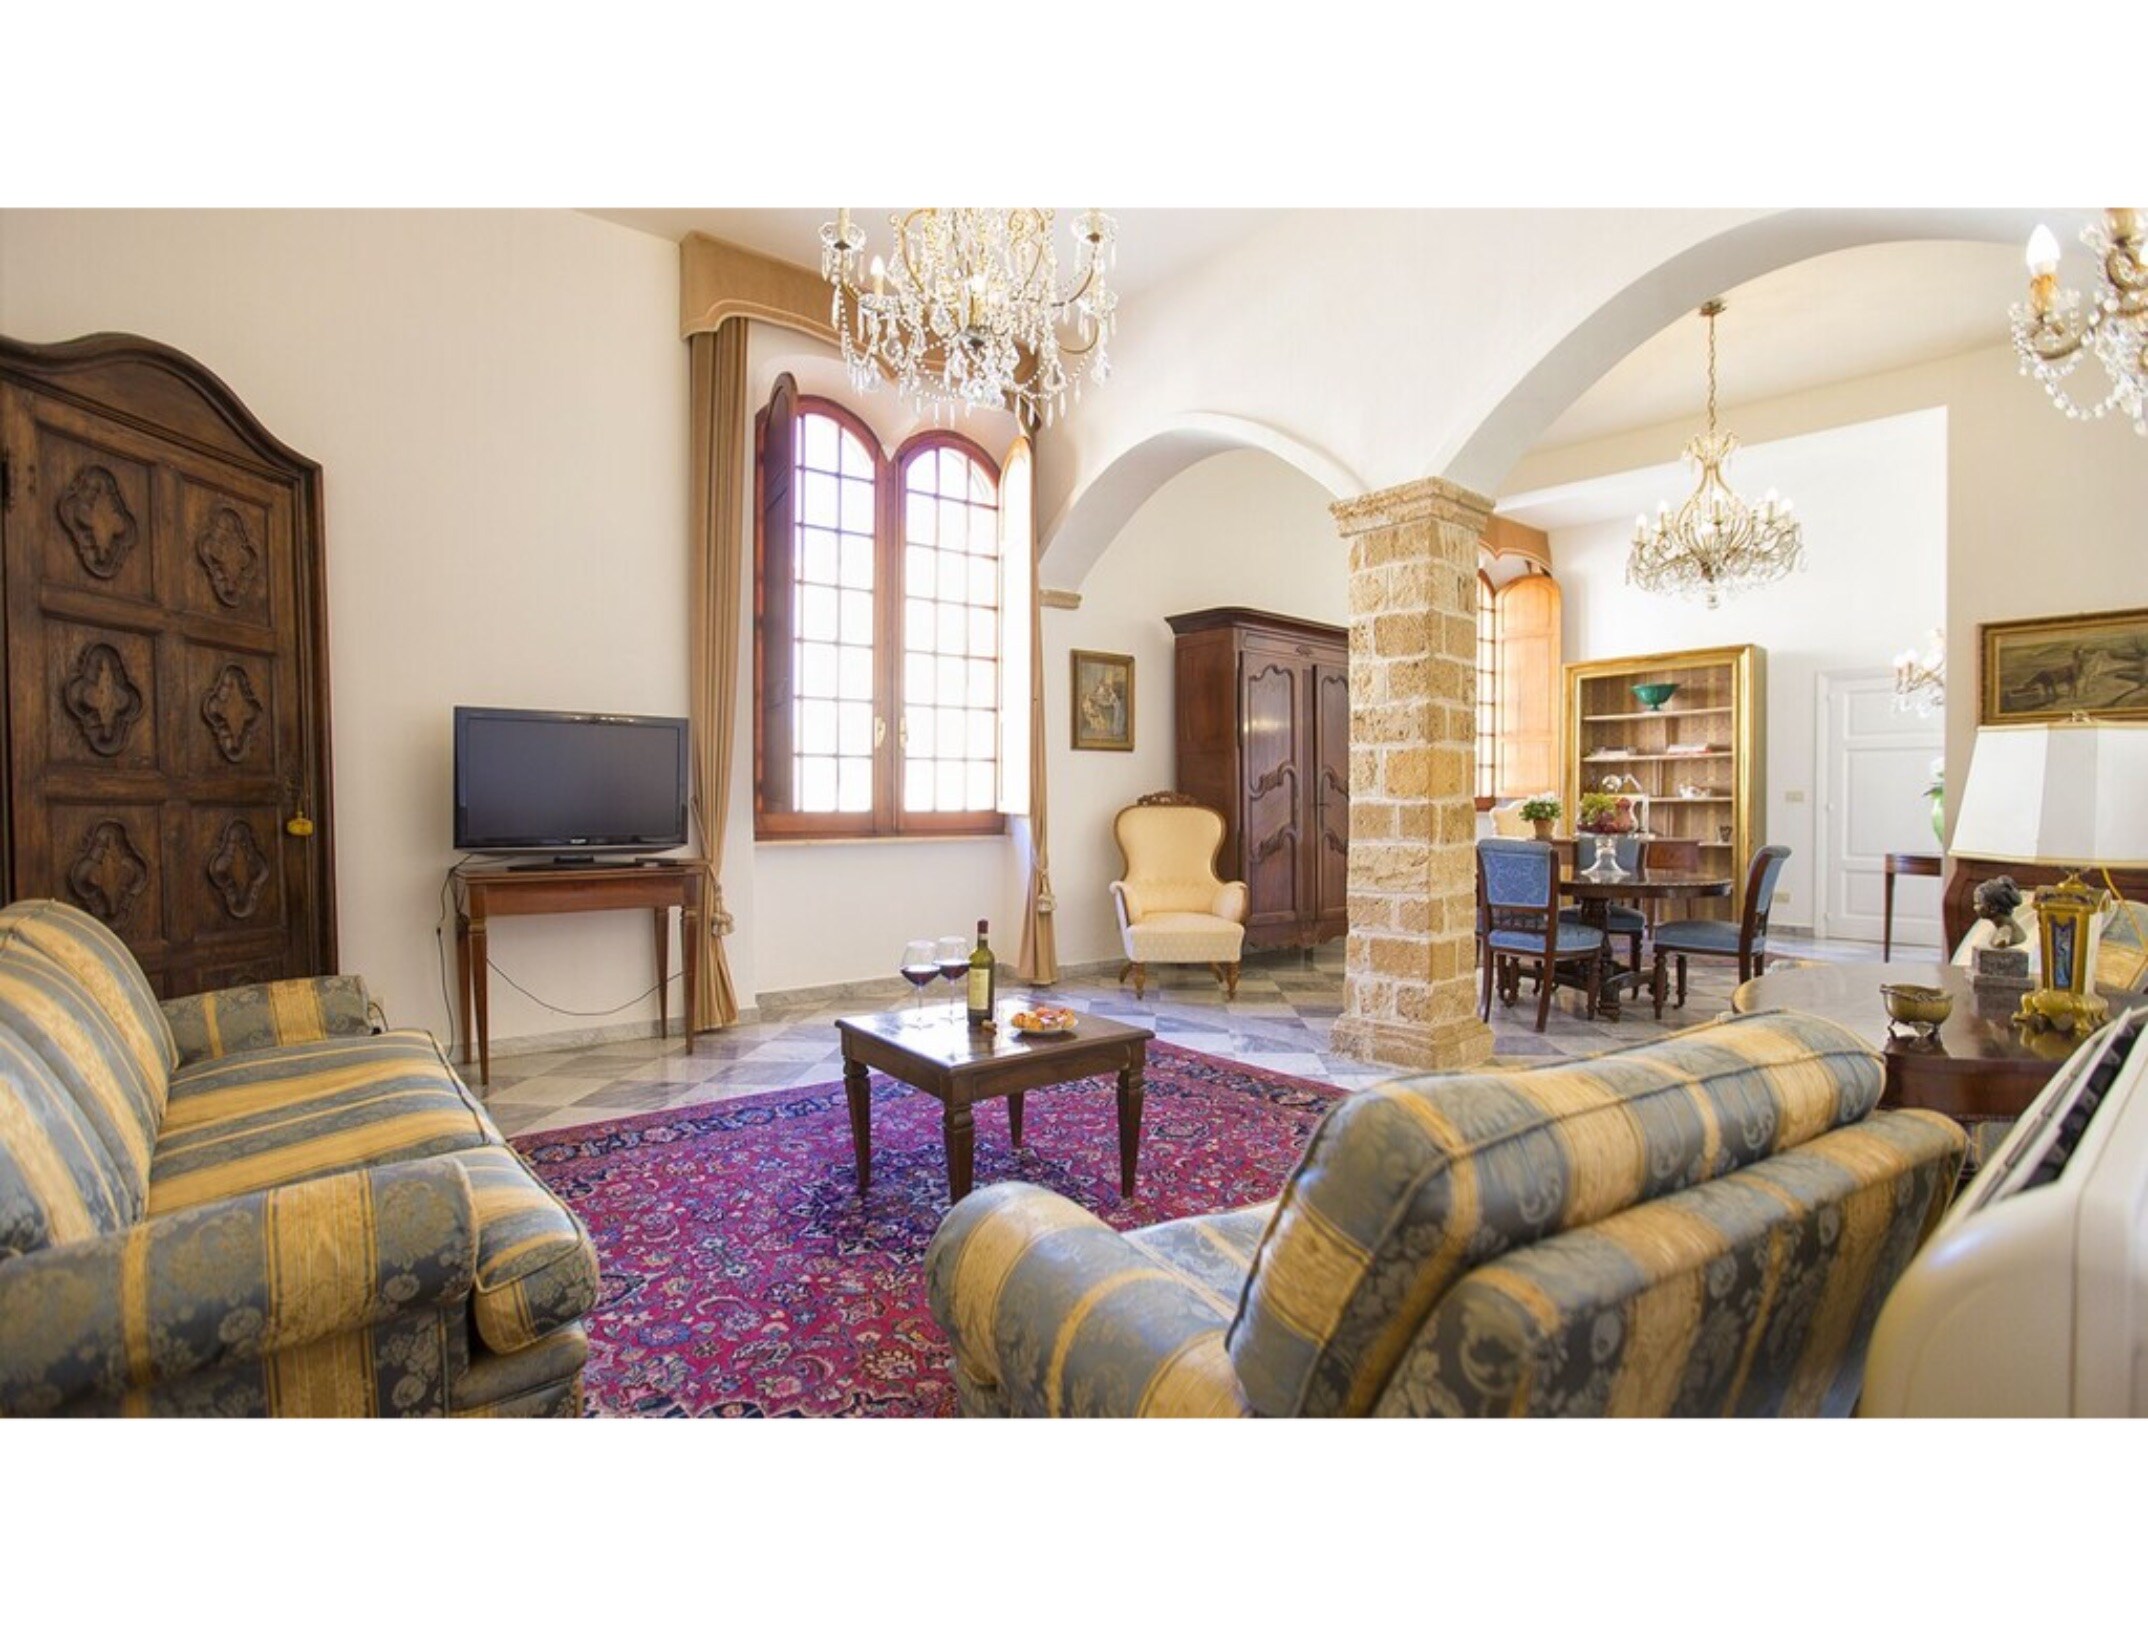 Property Image 1 - Alghero, Palazzo D’albis in the center for 8 people